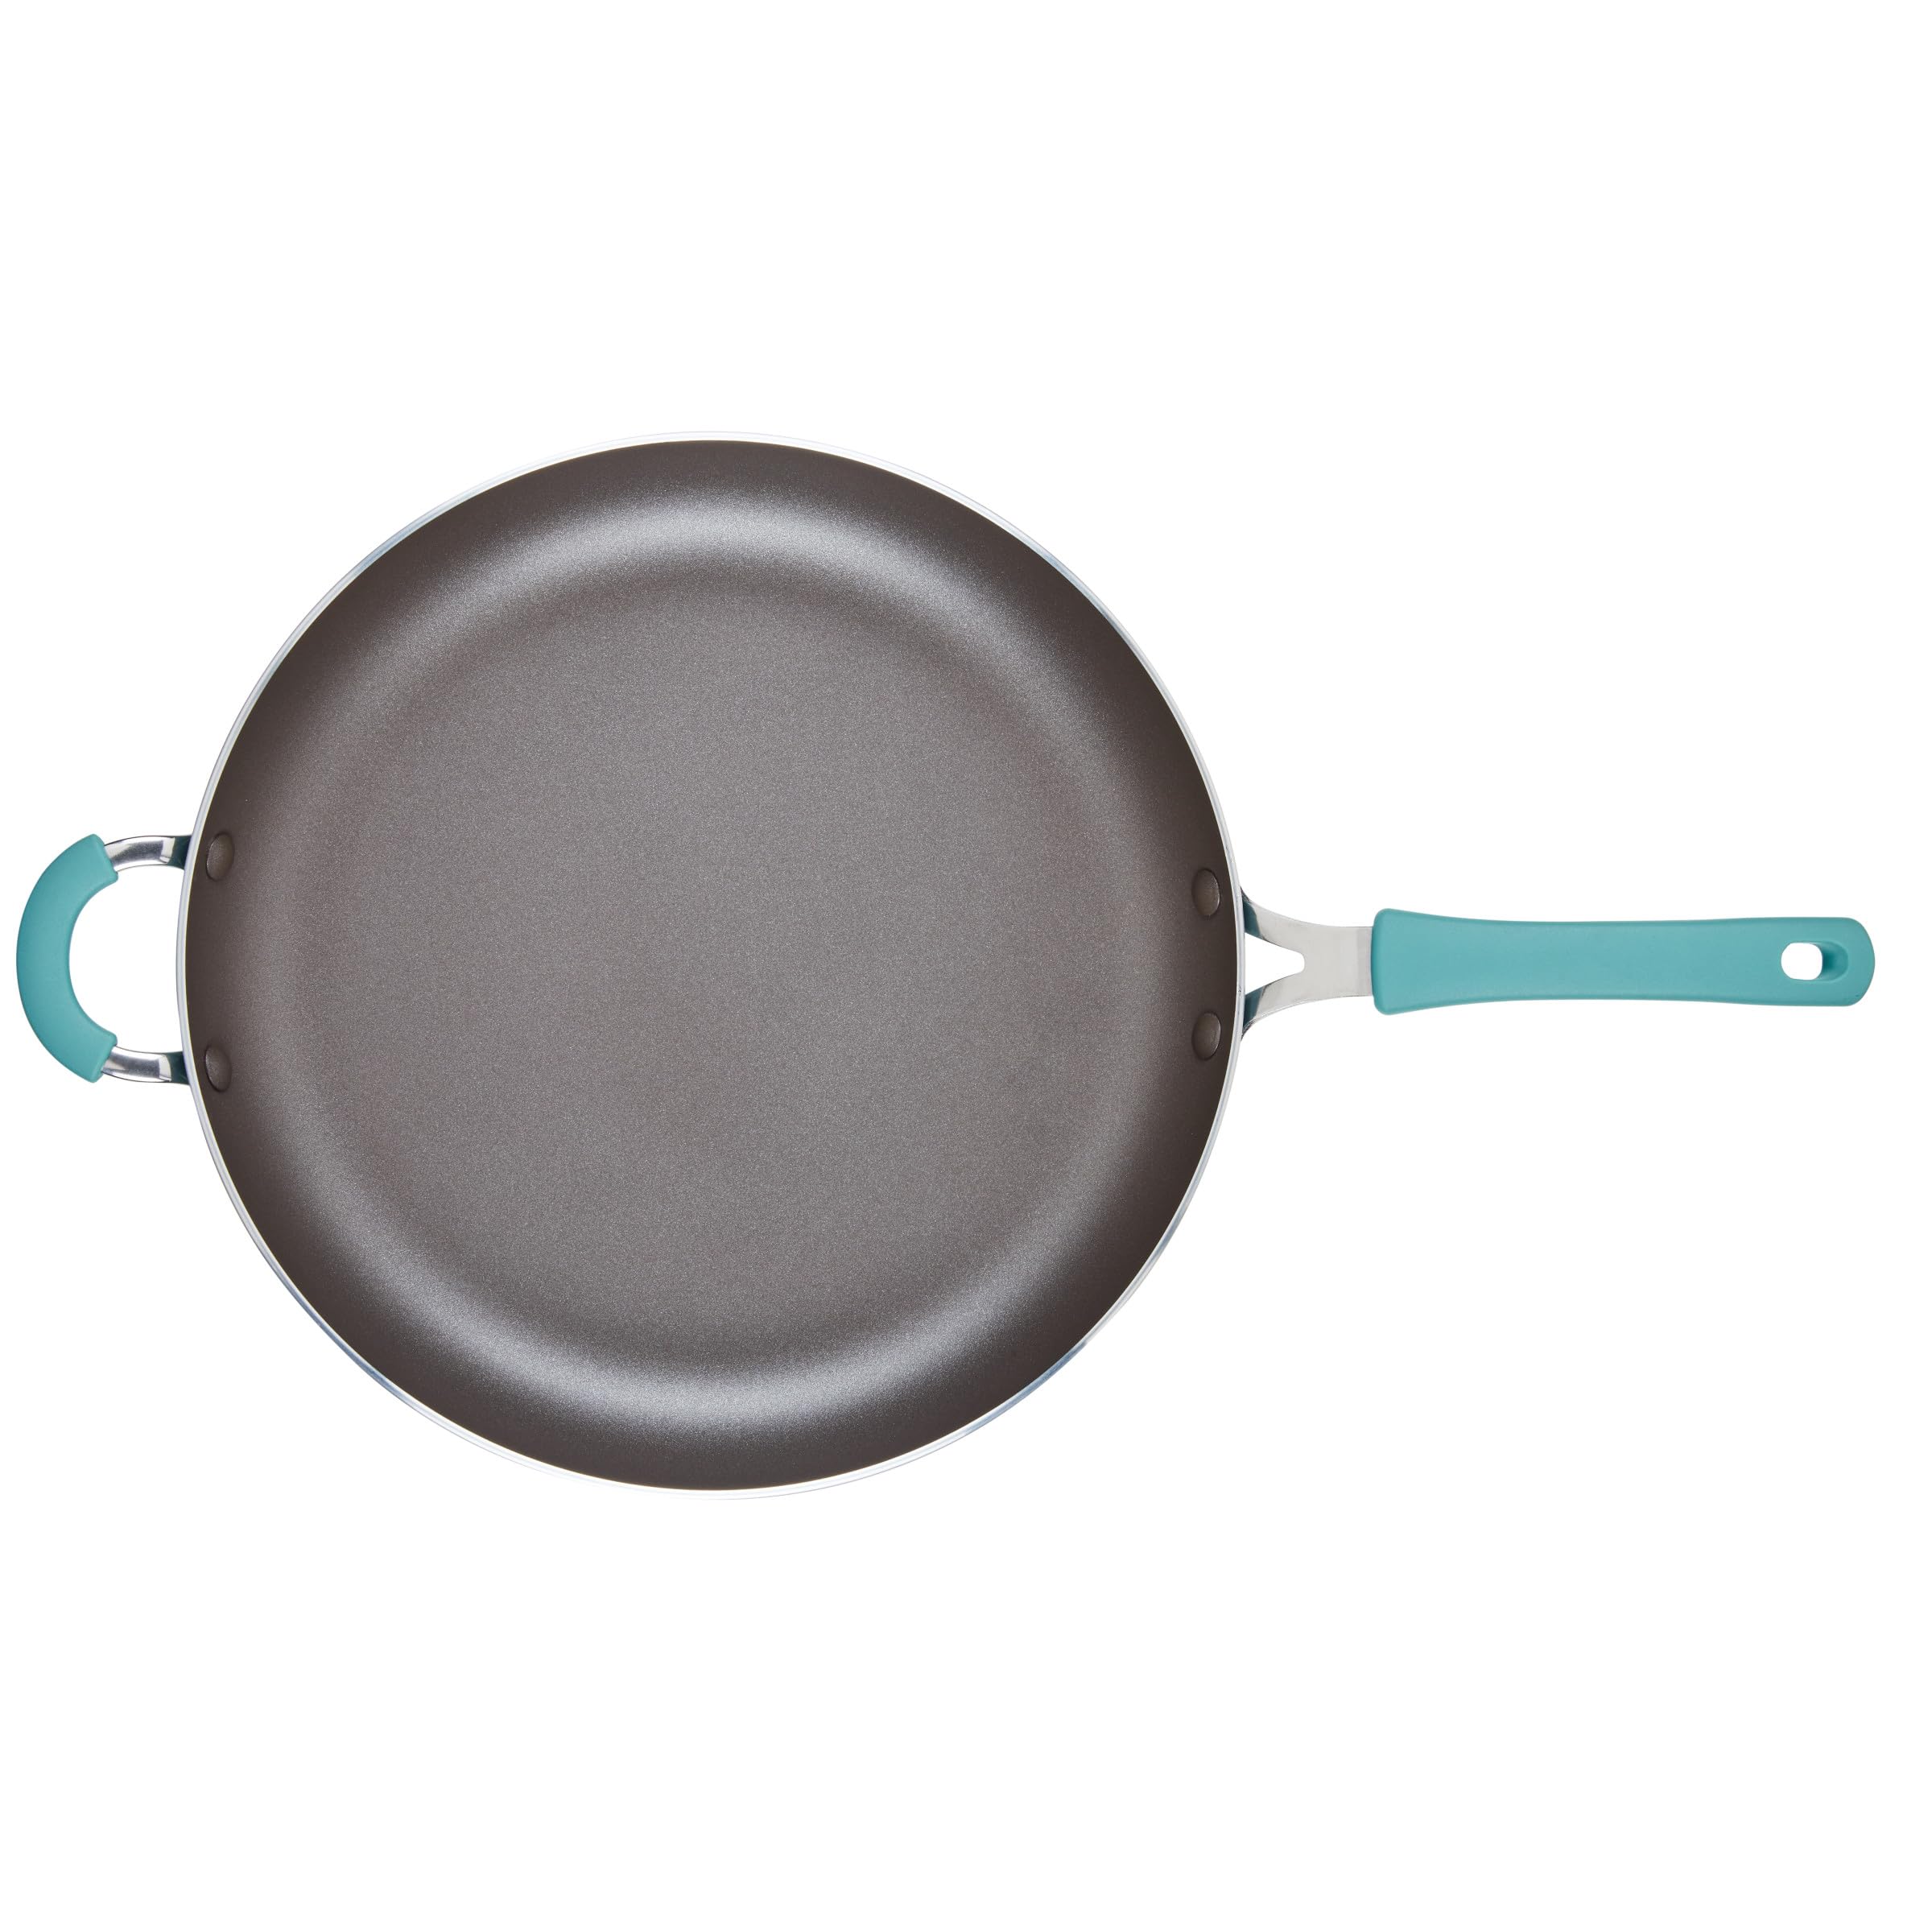 Rachael Ray Cook + Create Nonstick Frying Pan/Skillet with Helper Handle, 14 Inch - Agave Blue